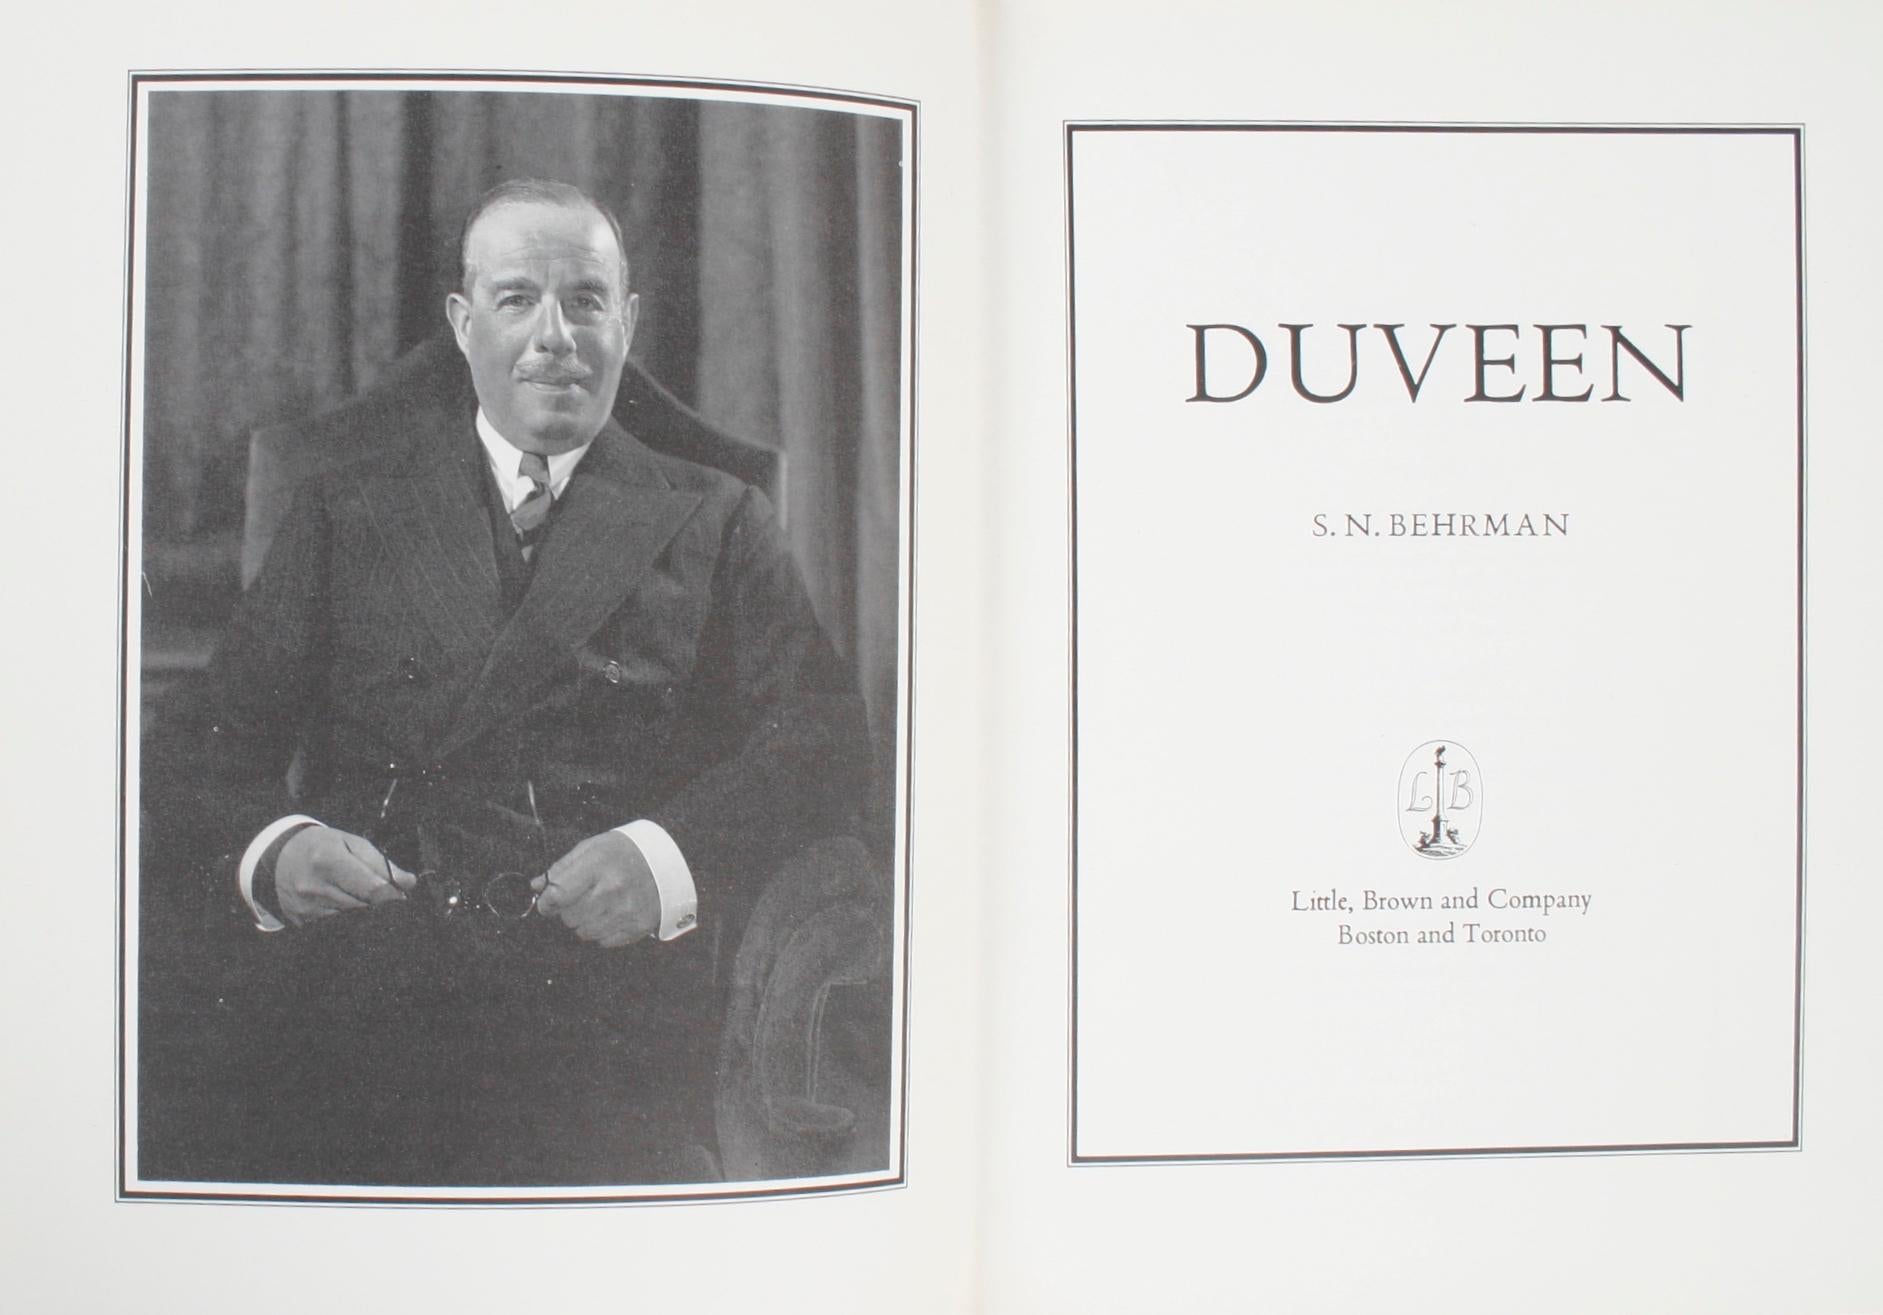 Duveen by S. N. Behrman. Little, brown and company, 1972. First Edition hardcover with dust jacket. The biography of the colorful art impresario of the turn-of-the 20th century who made a fortune selling and reselling Old Masters paintings from the